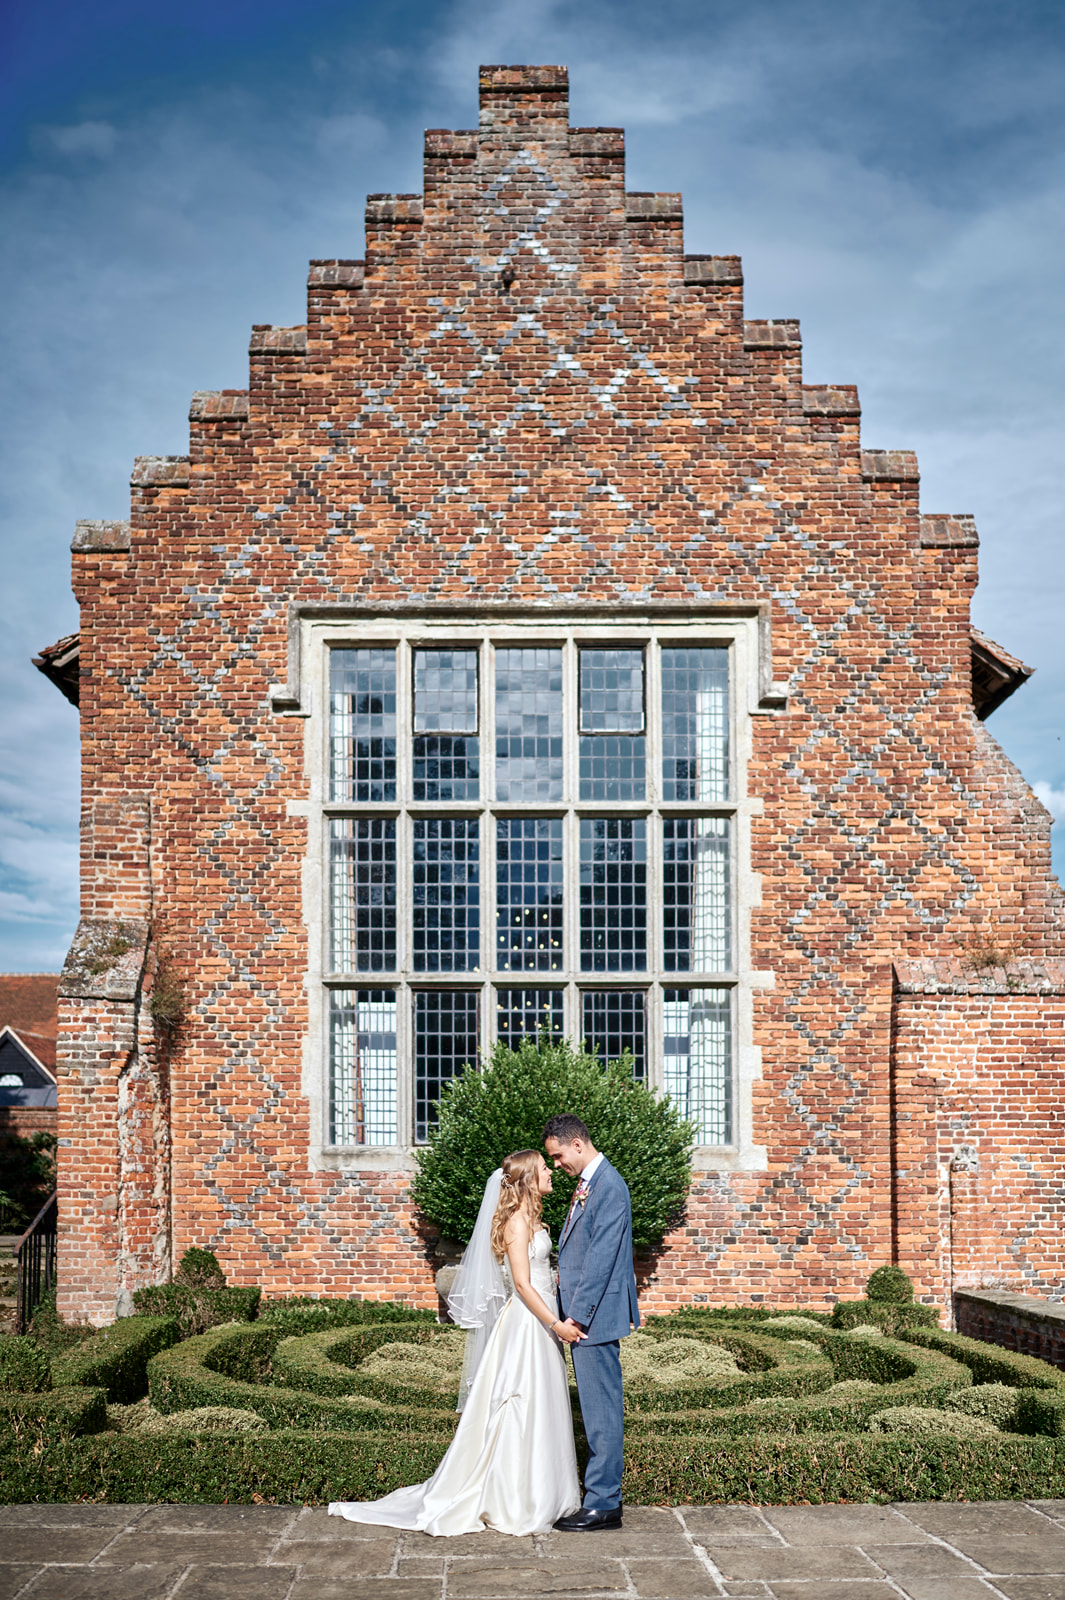 Layer Marney Tower Wedding - Rachel Reeve Photography - Long Gallery